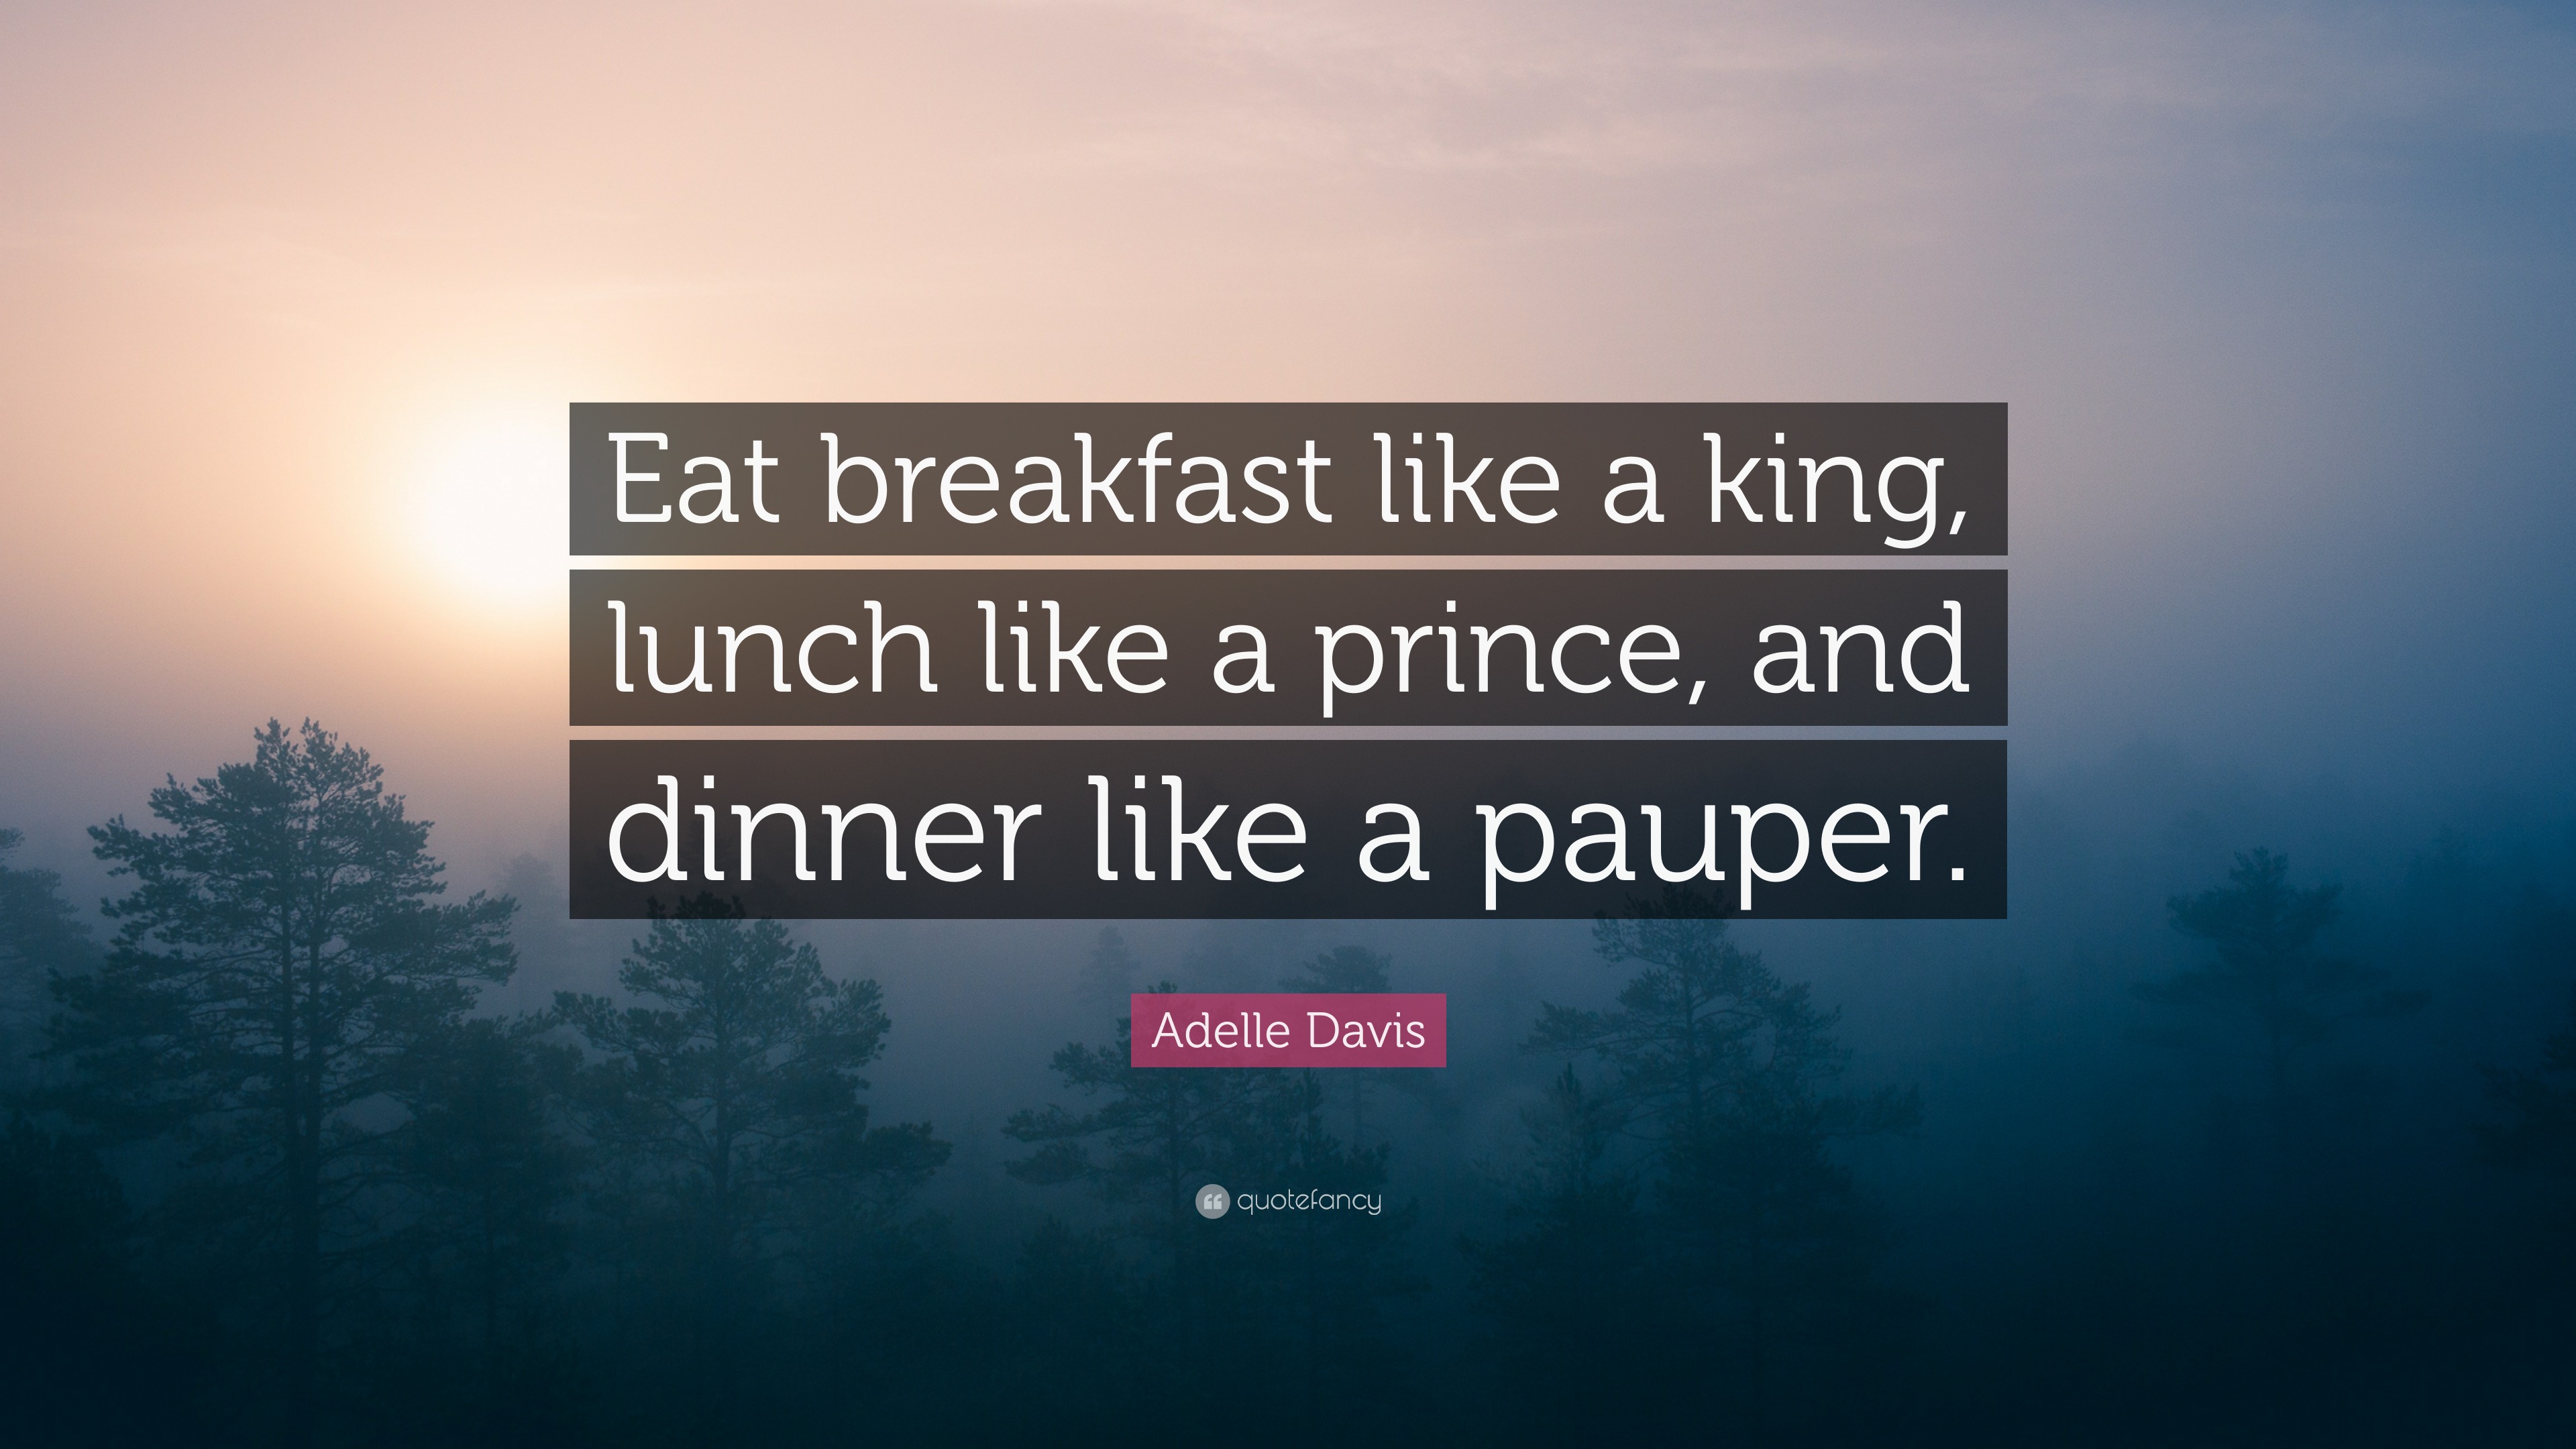 Adelle Davis Quote: “Eat breakfast like a king, lunch like a prince